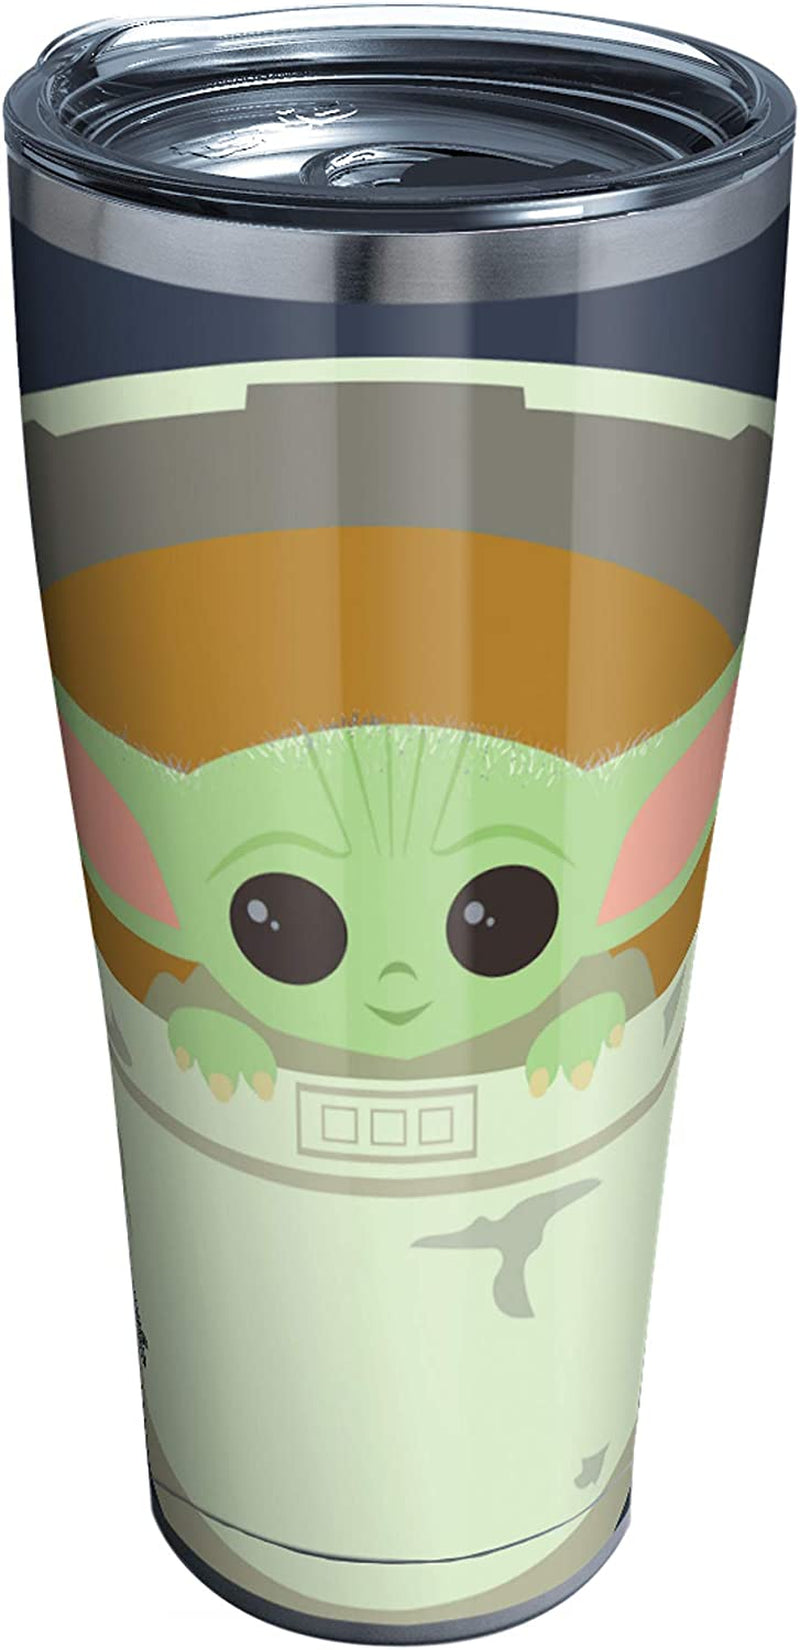 Tervis Triple Walled the Mandalorian Child in Carrier Insulated Tumbler Cup Keeps Drinks Cold & Hot, 30Oz, Stainless Steel